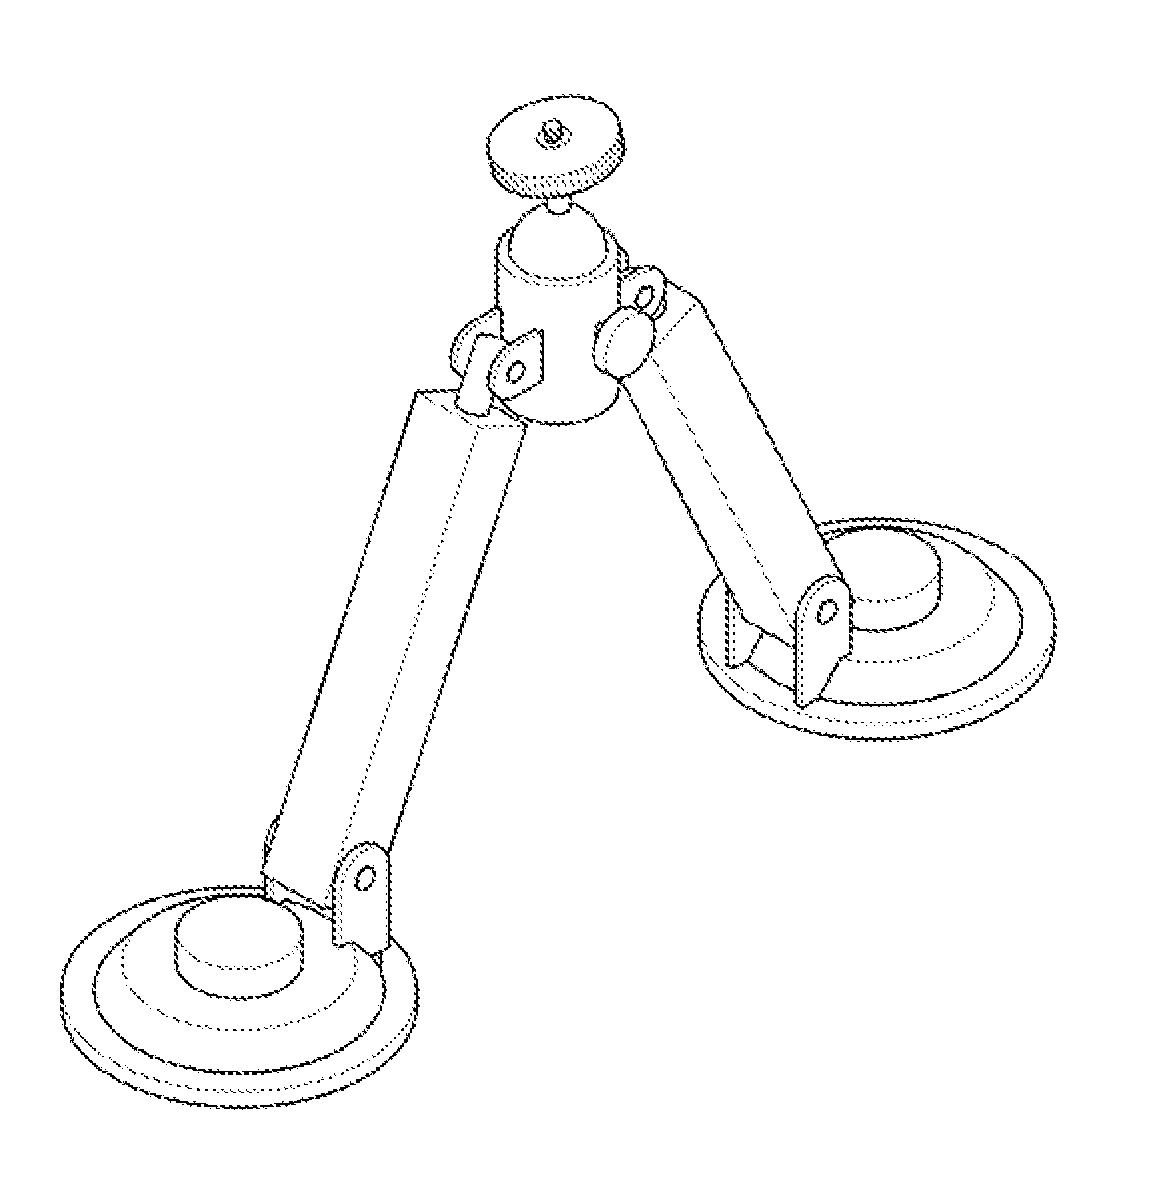 Apparatus for affixing a camera